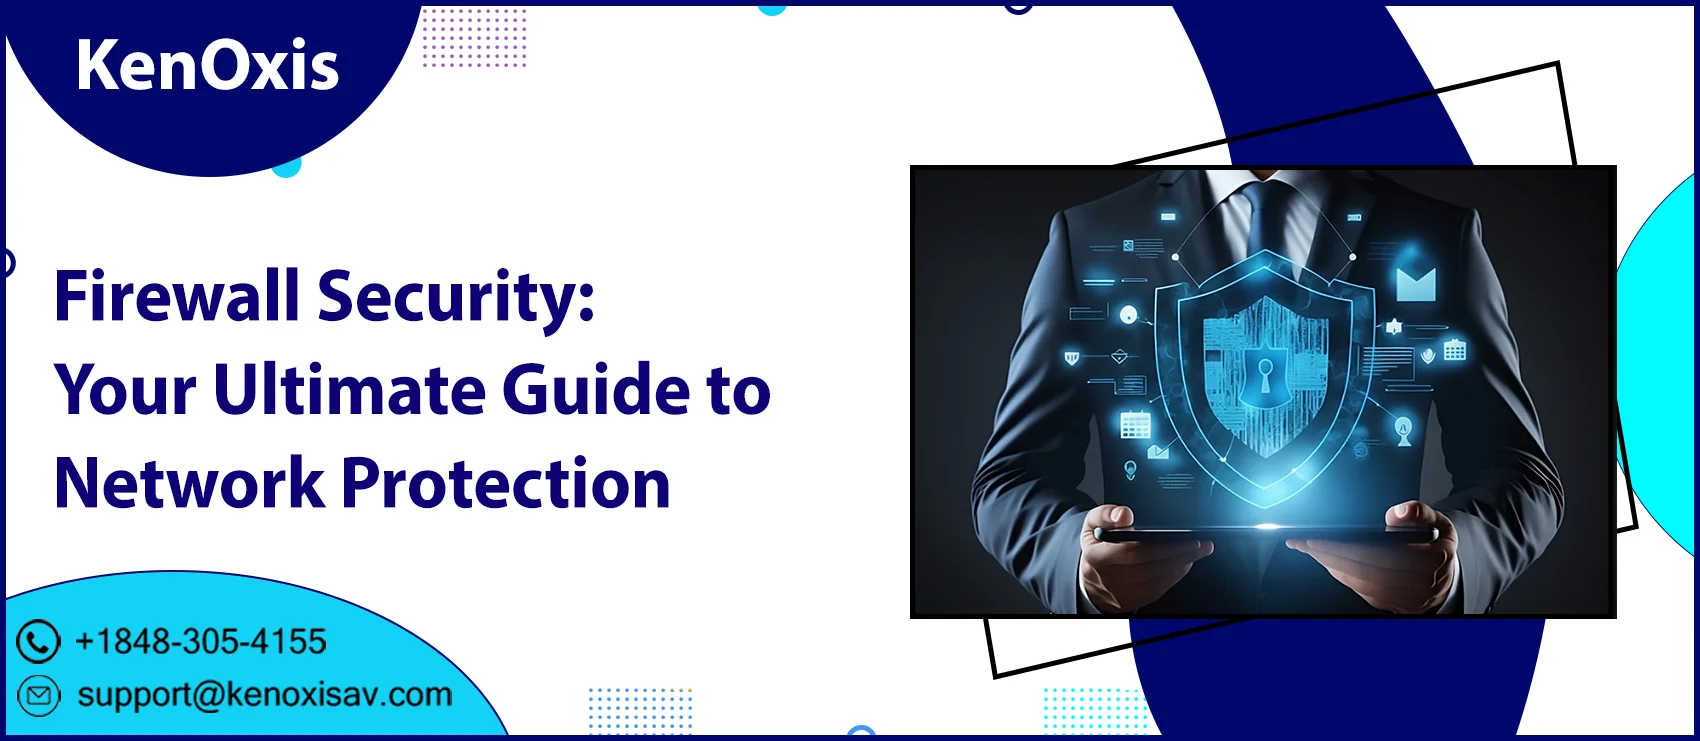 Firewall Security: Your Ultimate Guide to Network Protection